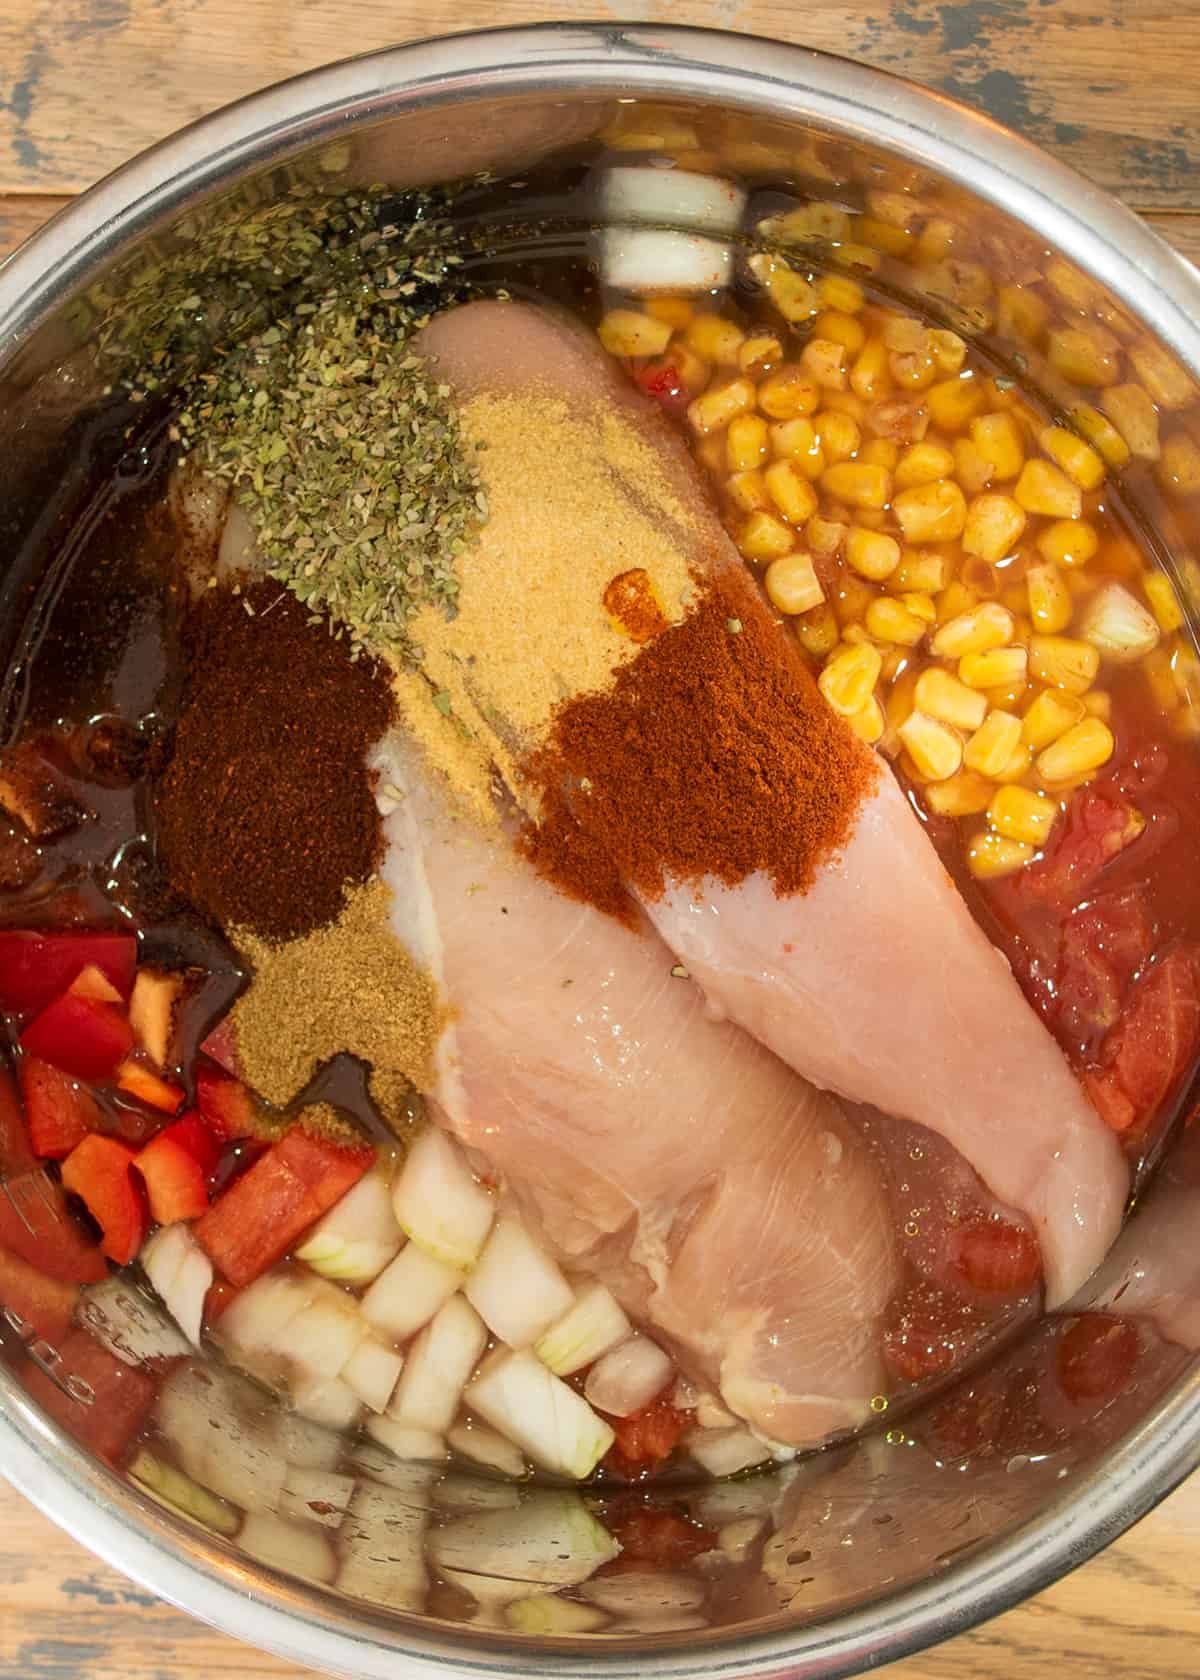 Overhead of soup ingredients put into a slow cooker before cooking.